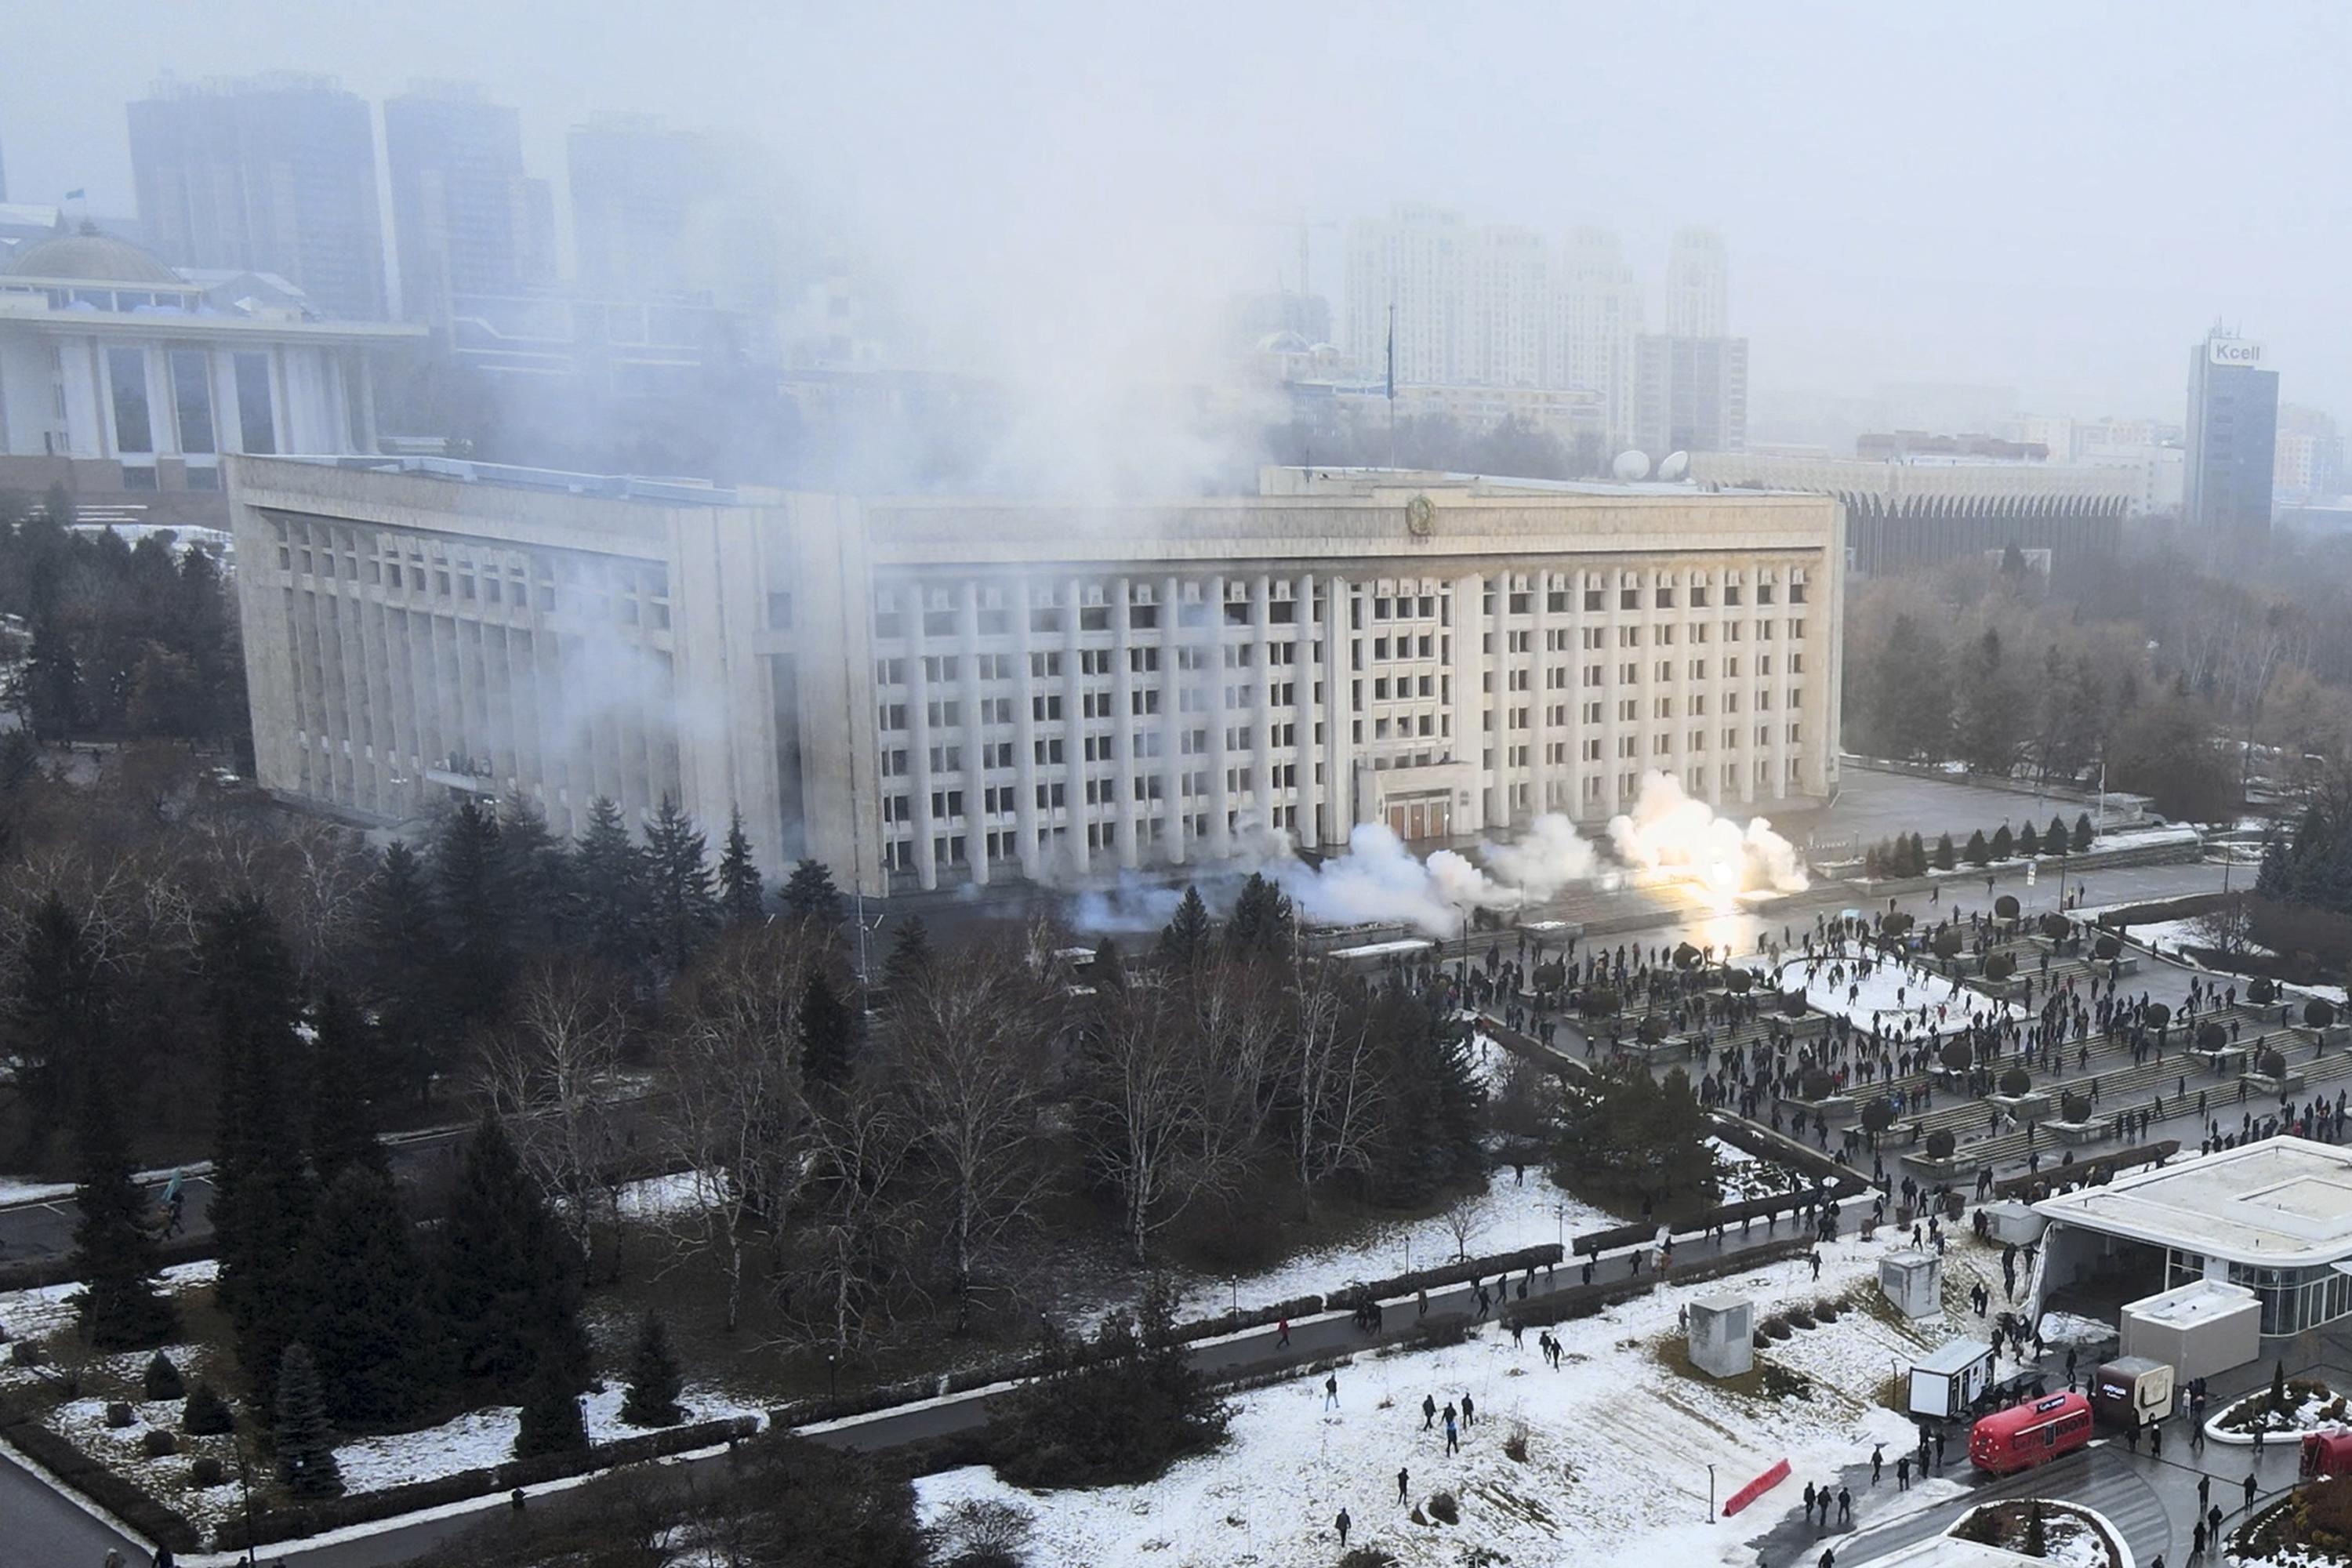 Kazakhstan unrest: What and why?